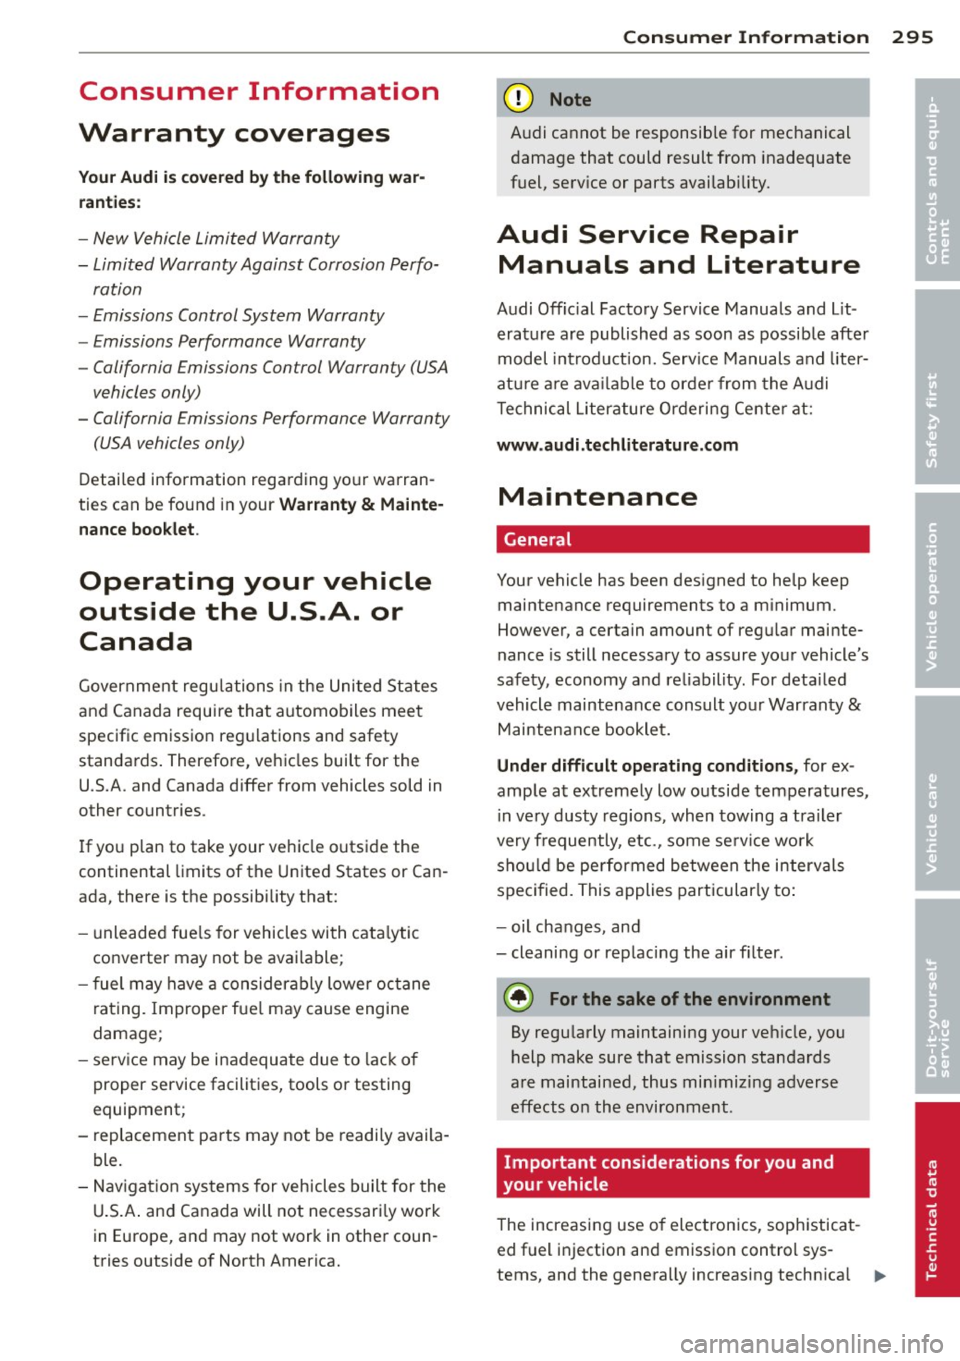 AUDI Q5 2013  Owners Manual Consumer  Information 
Warranty  coverages 
Your Audi  is  covered by the  following  war­
ranties : 
- New  Vehicle  Limited  Warranty 
- Limited  Warranty  Against  Corrosion  Perfo-
ration 
- Emis